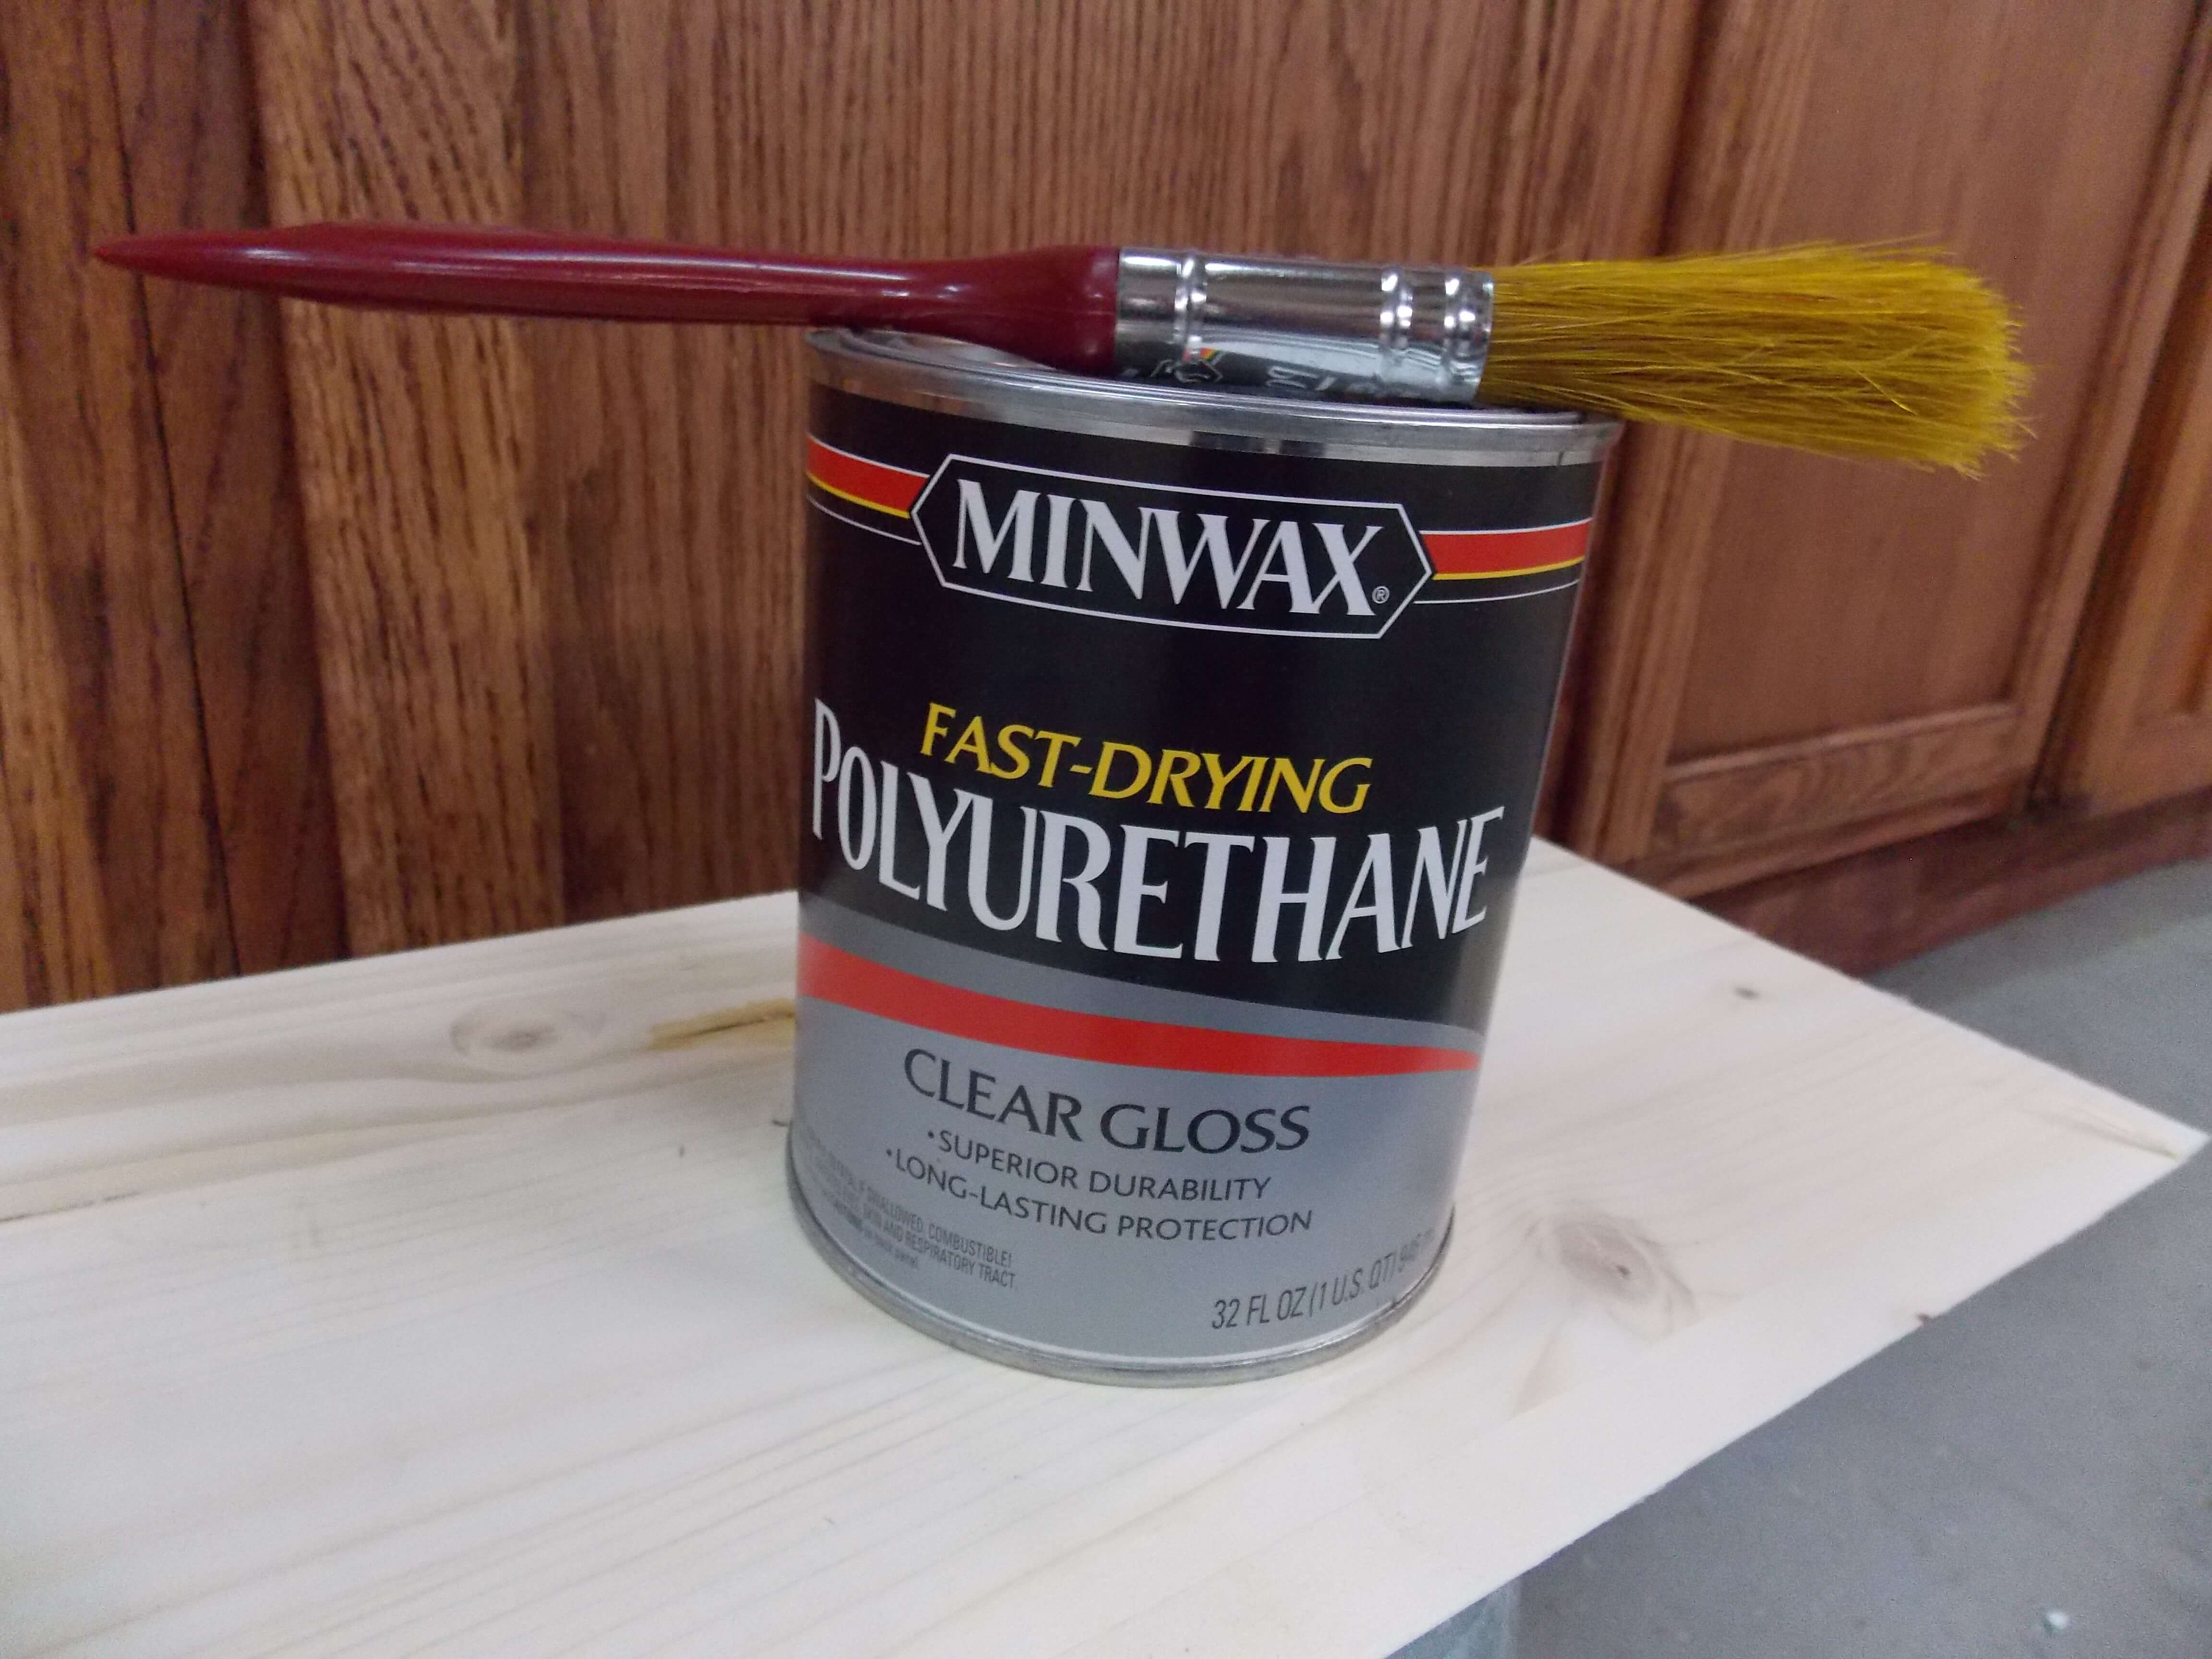 Apply a coat of fast-drying polyurethane to seal in cabinet stain